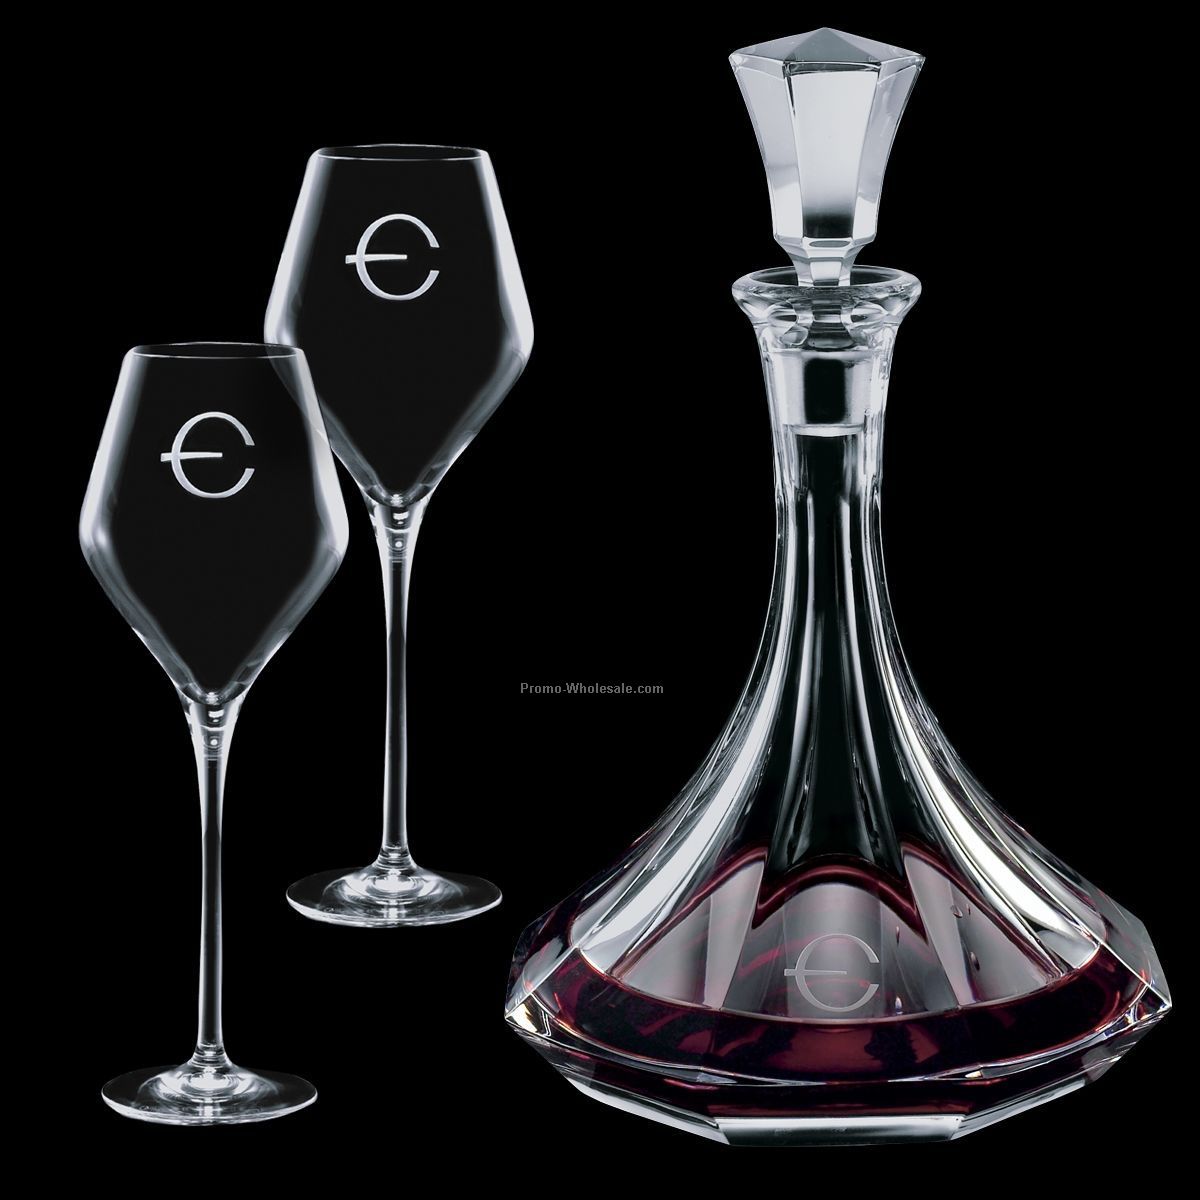 30 Oz. Europa Crystal Decanter And 2 Wine Glasses